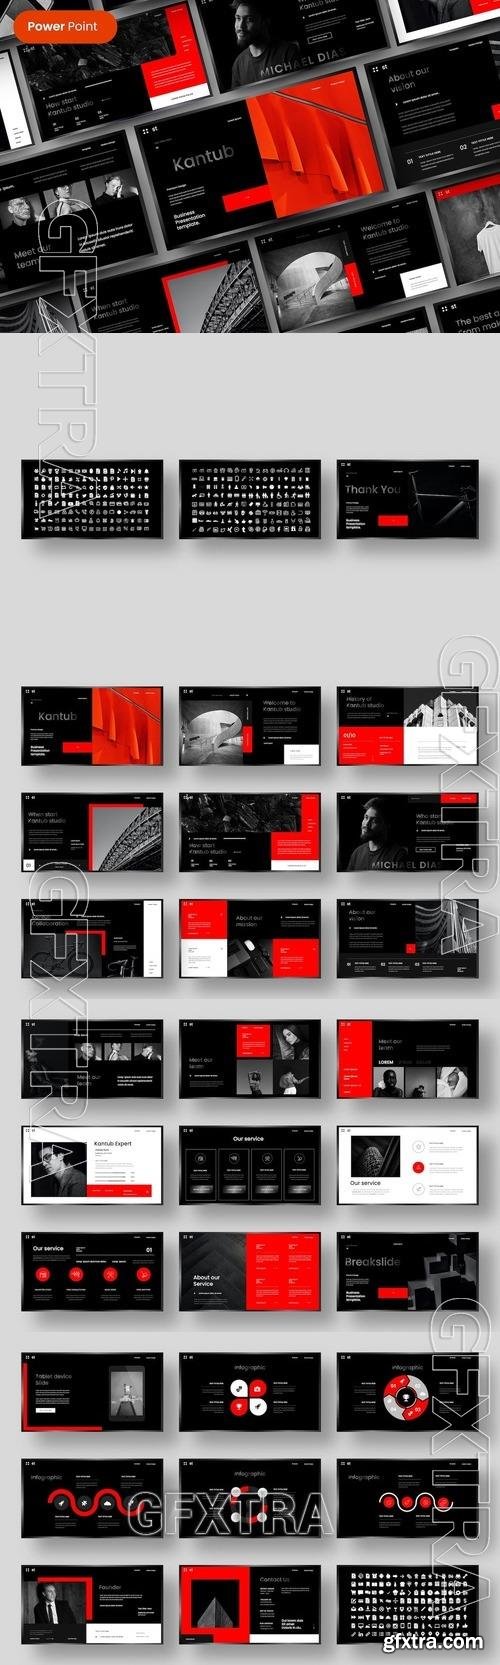 Kantub - Business PowerPoint Template 7H7YUDY